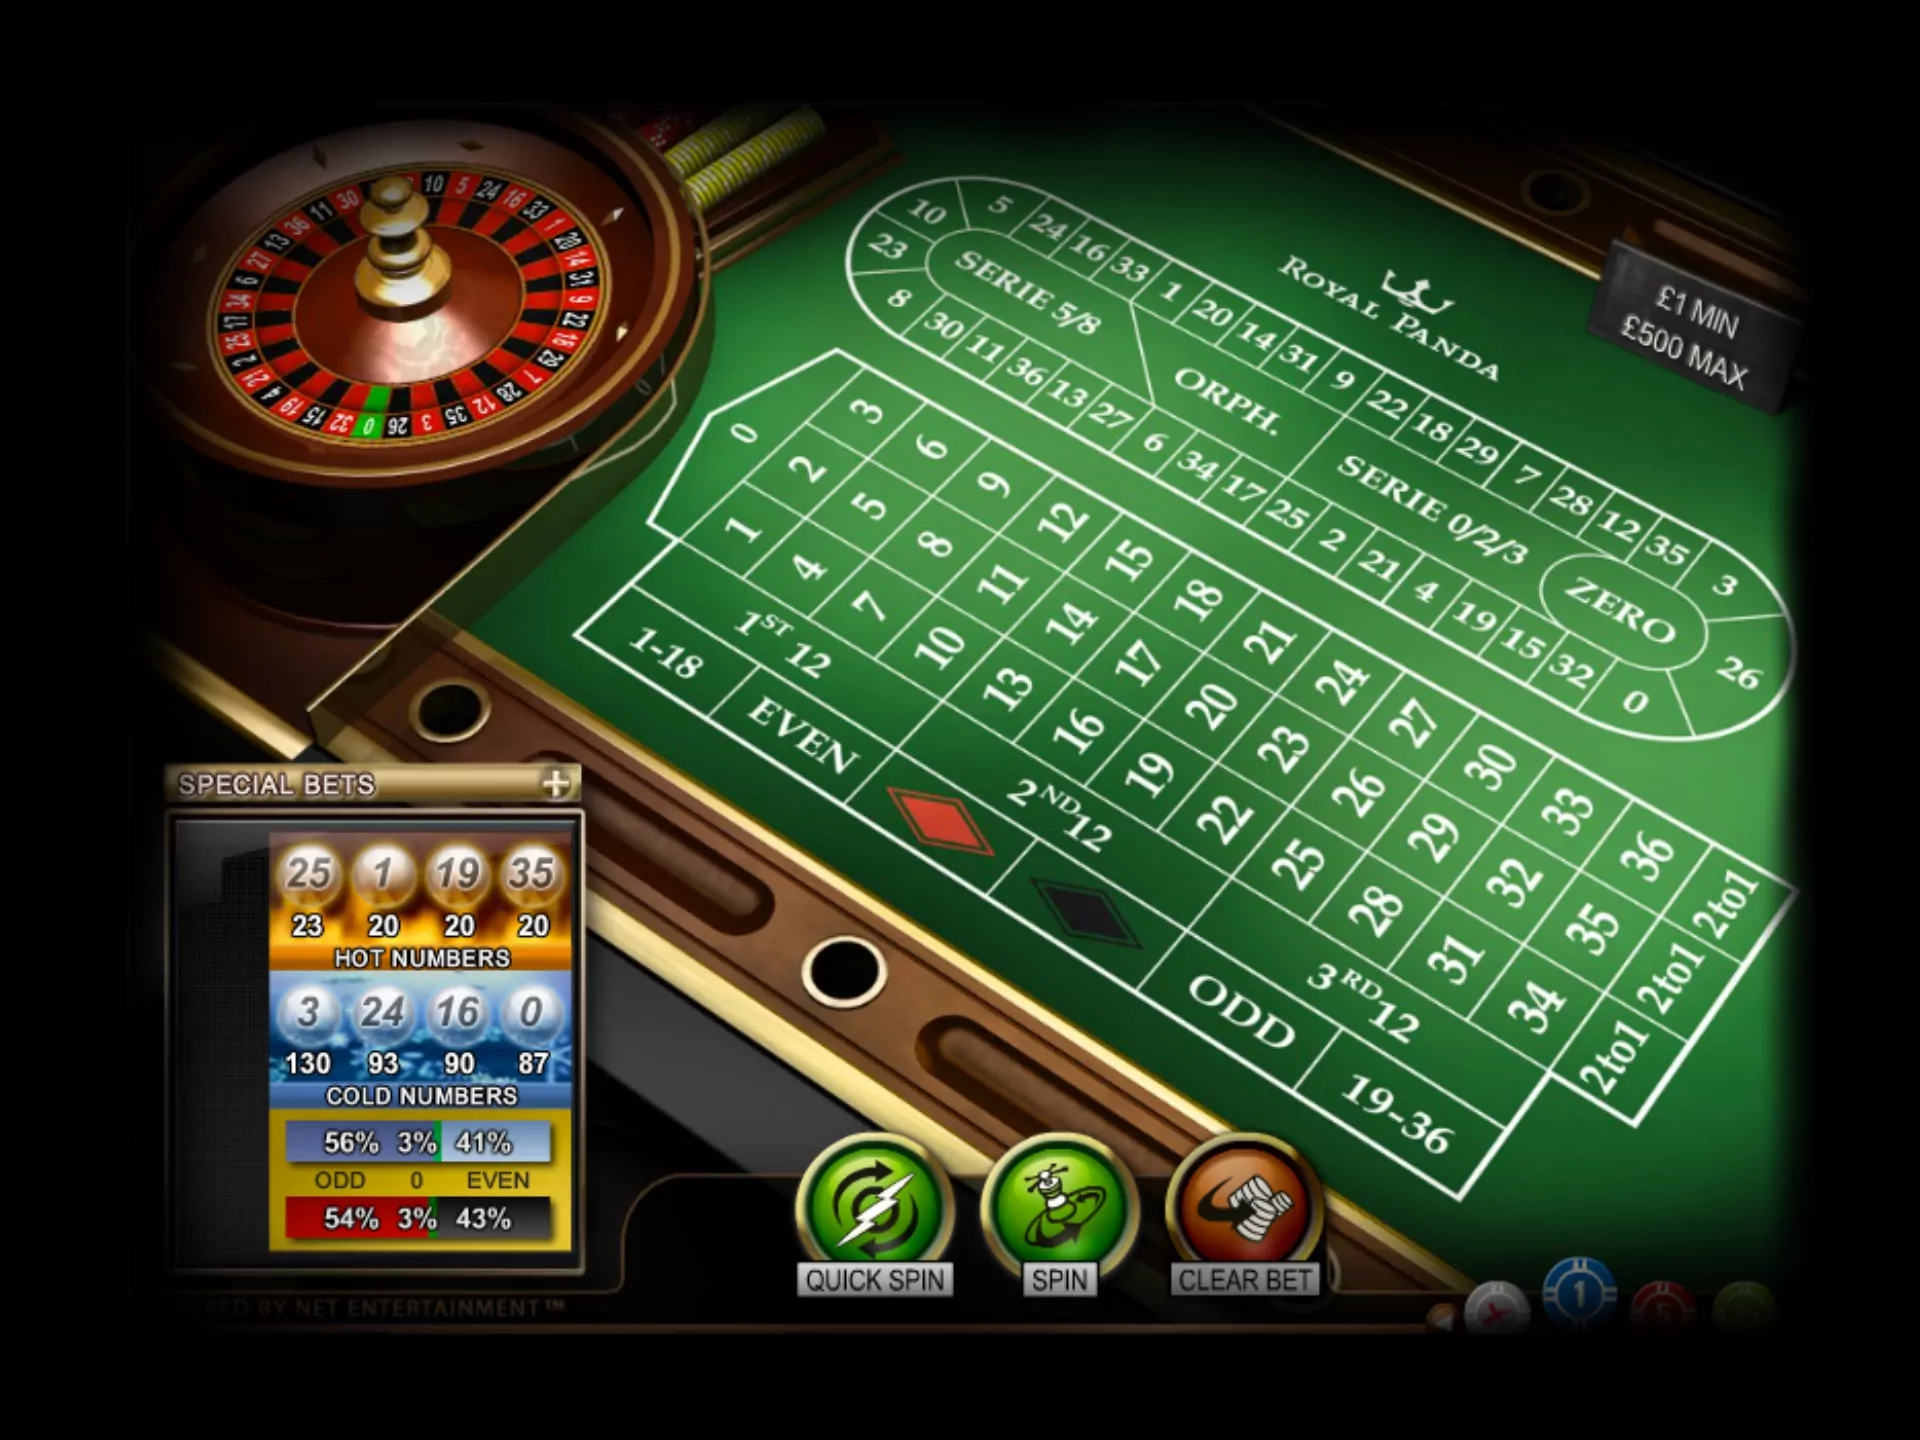 There are easy rules, so you can start playing online roulette right now.